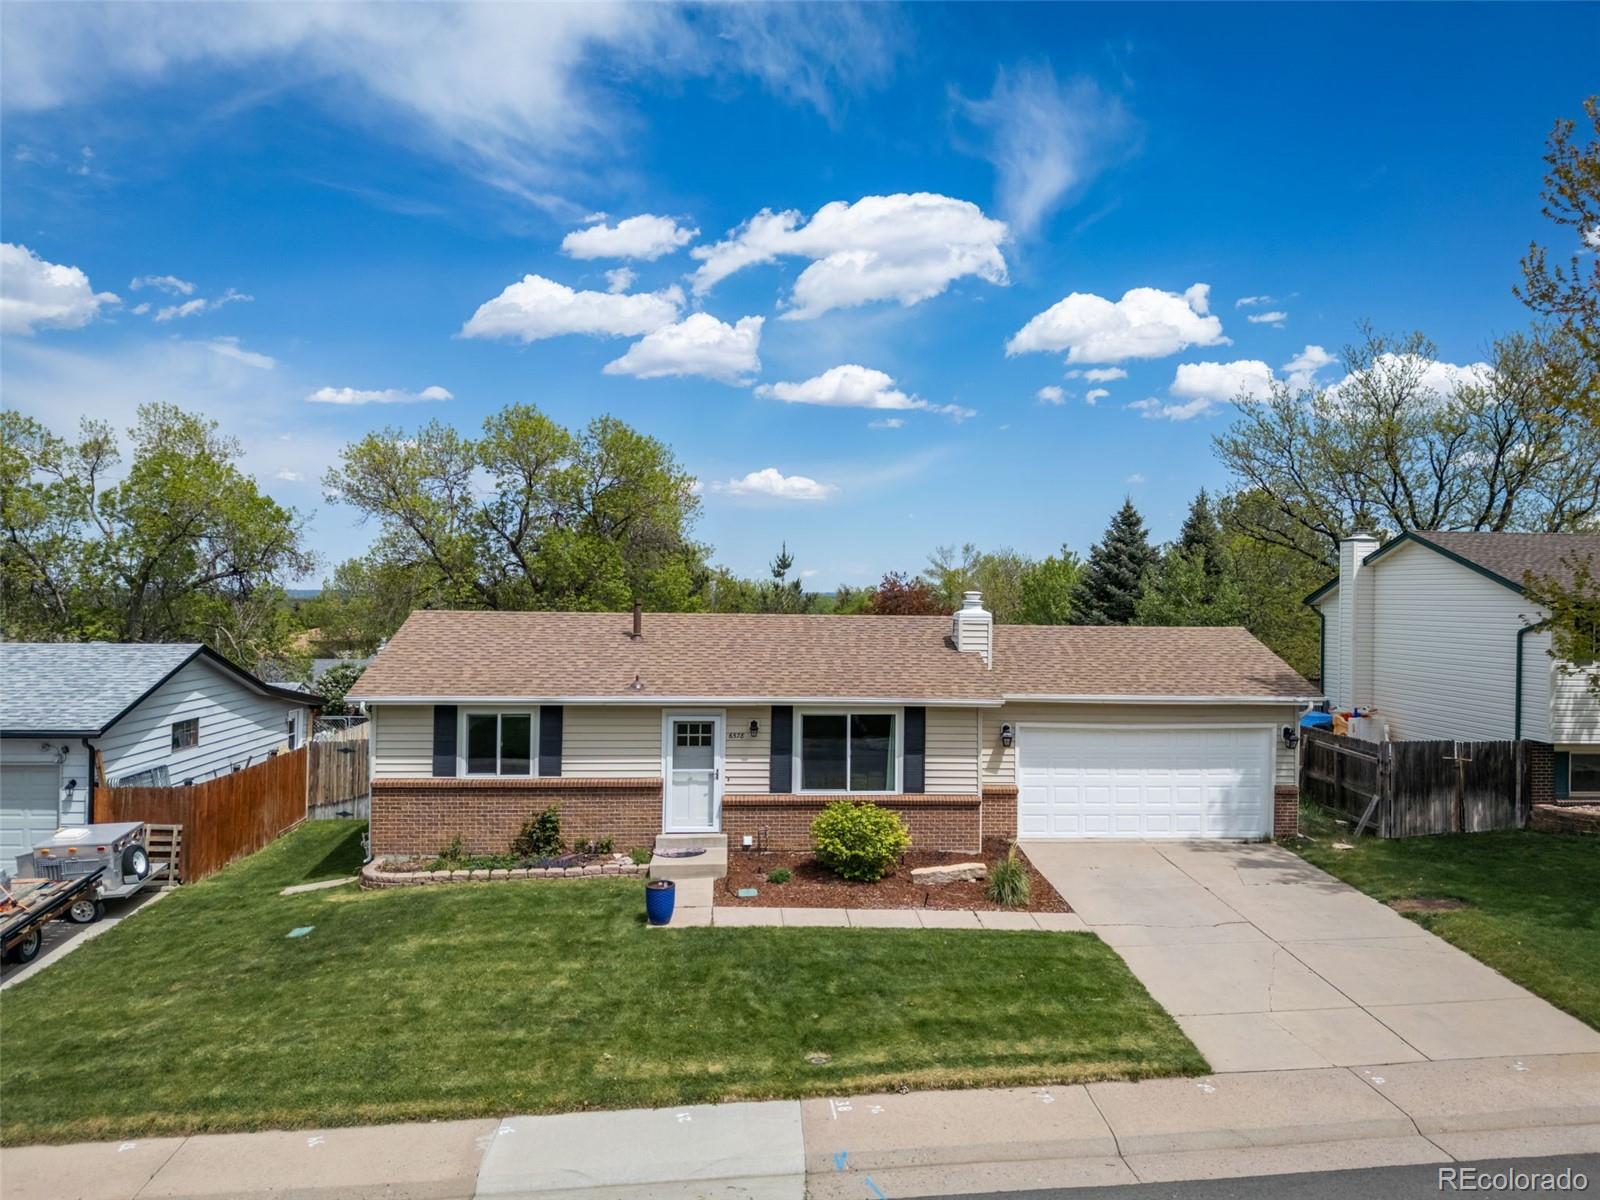 6578 s garland way, Littleton sold home. Closed on 2024-06-04 for $555,000.